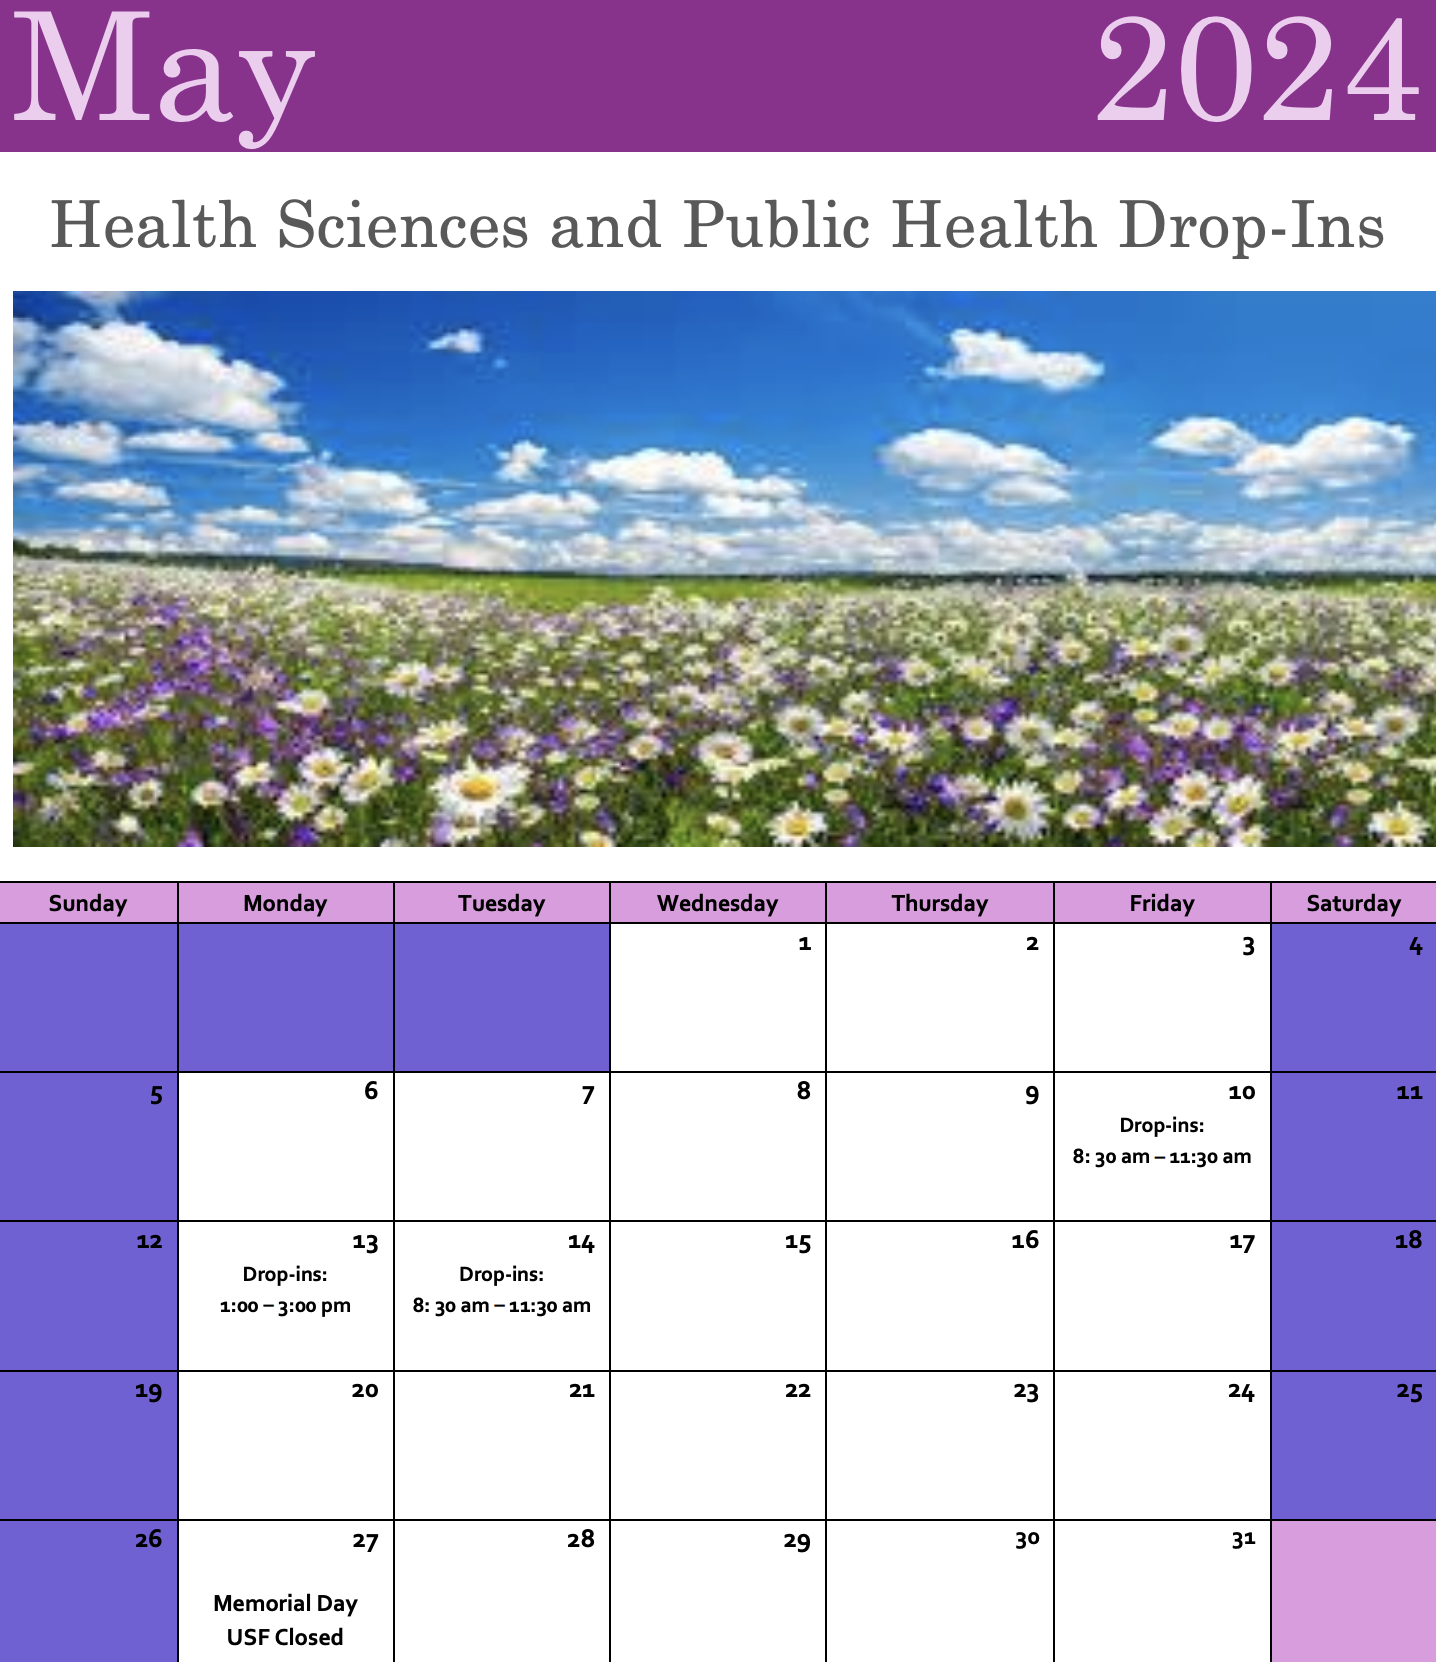 May 2024 drop-in advising calendar. Drop-ins will occur on May 10 and 15 from 8:30am to 11:00am and May 13 from 1:00pm to 3:30pm.